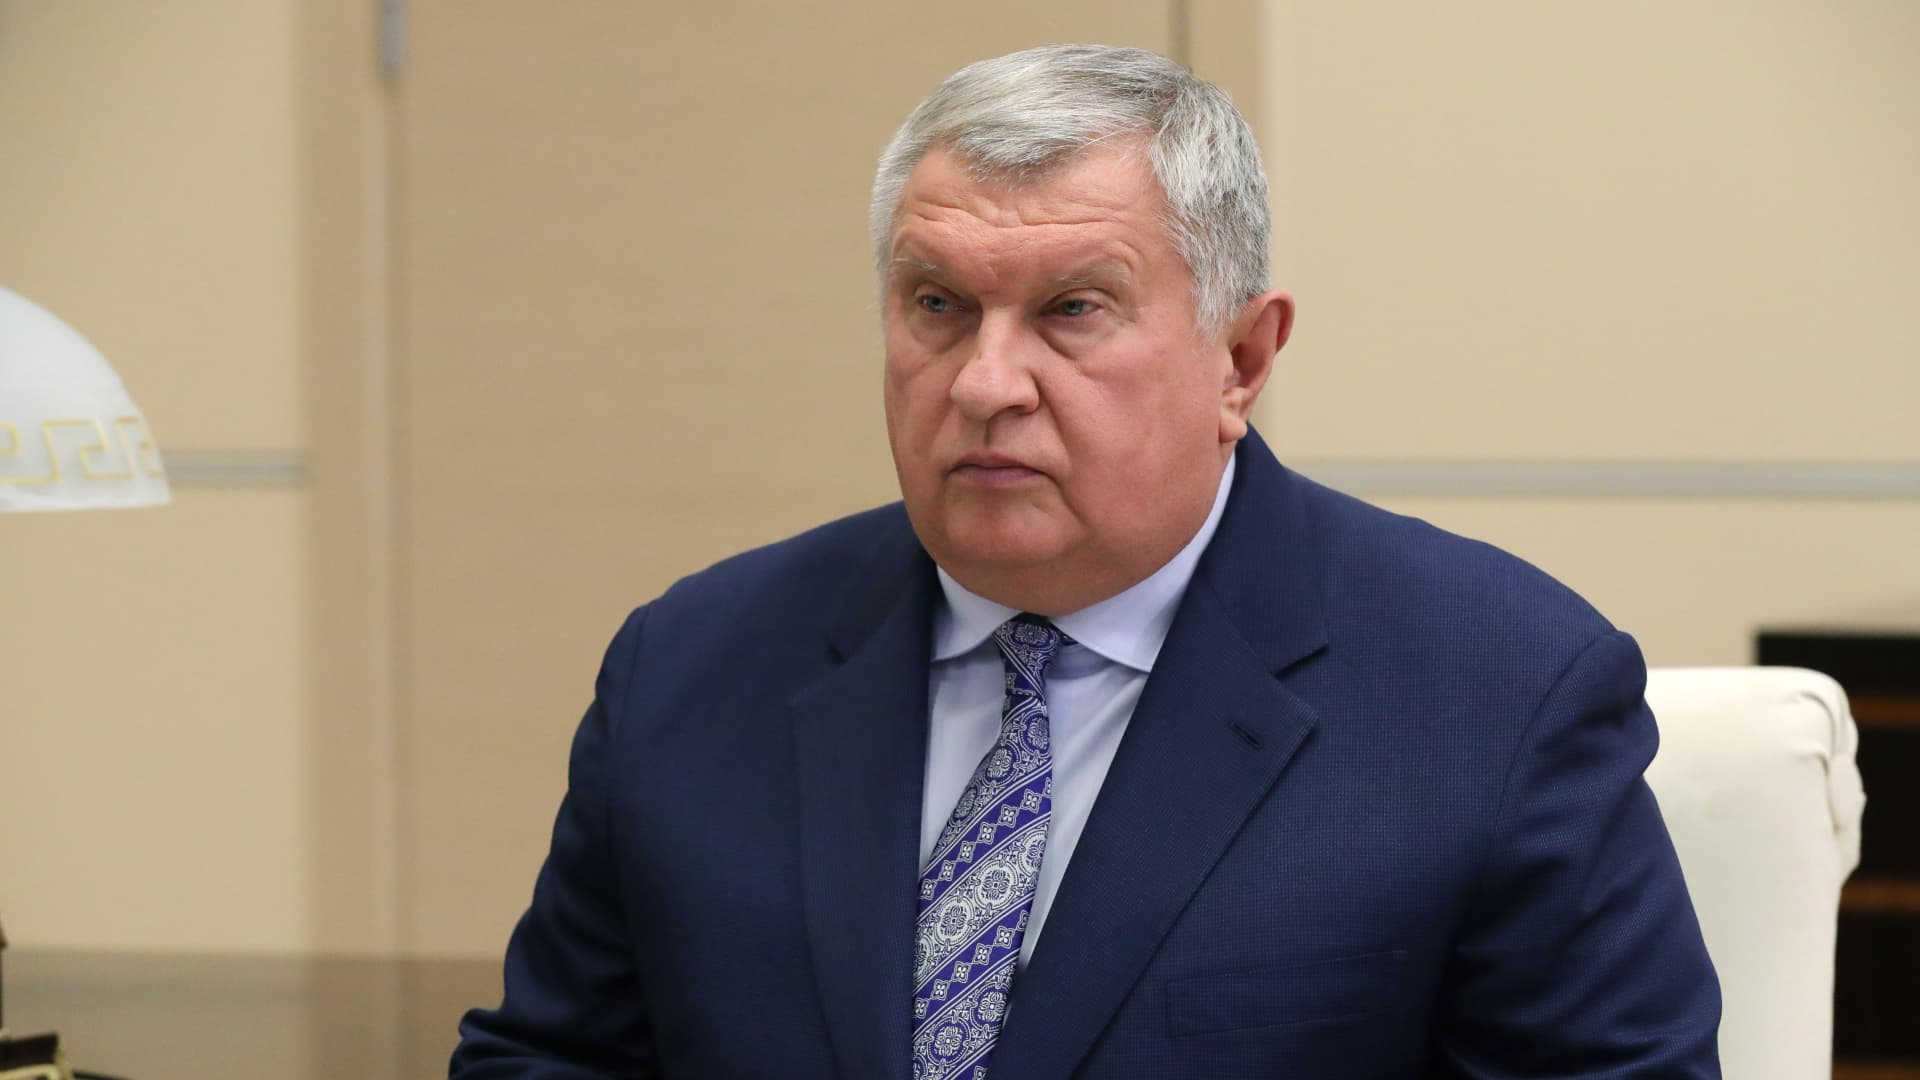 Rosneft CEO and Chairman of the Management Board Igor Sechin is seen during a meeting with Russia's President Putin in the presidential residence in Novo-Ogaryovo.